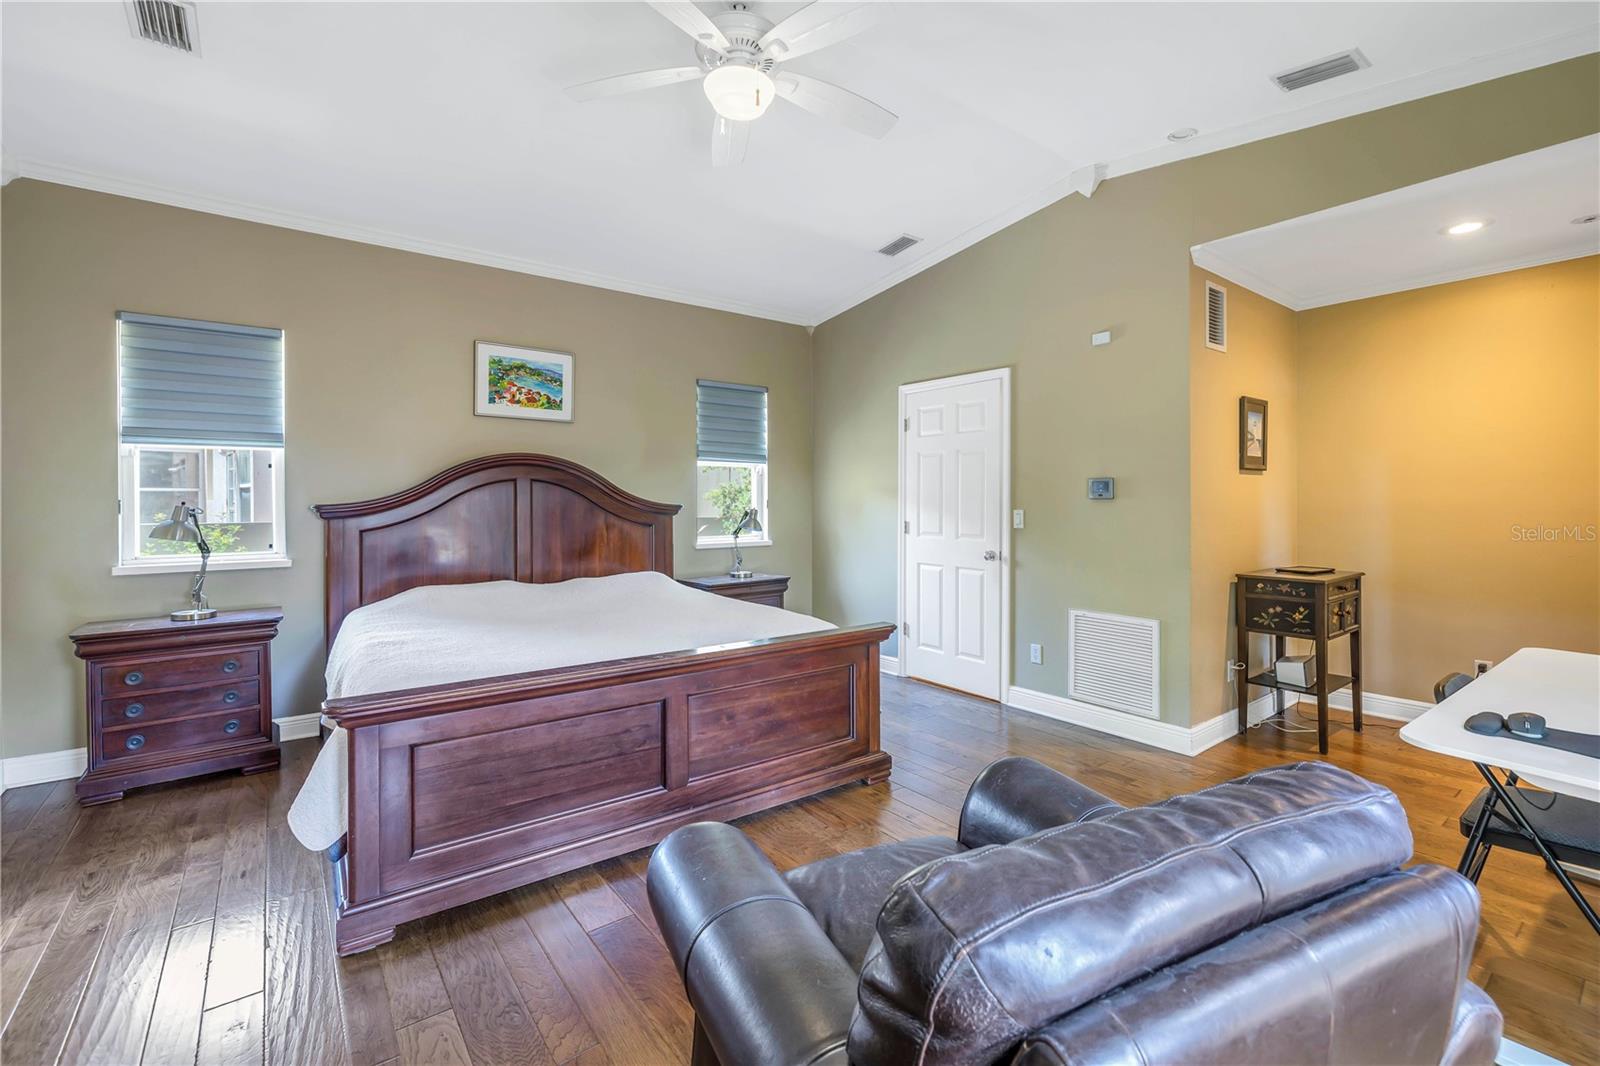 Spacious Primary Bedroom suite with pitched ceilings.